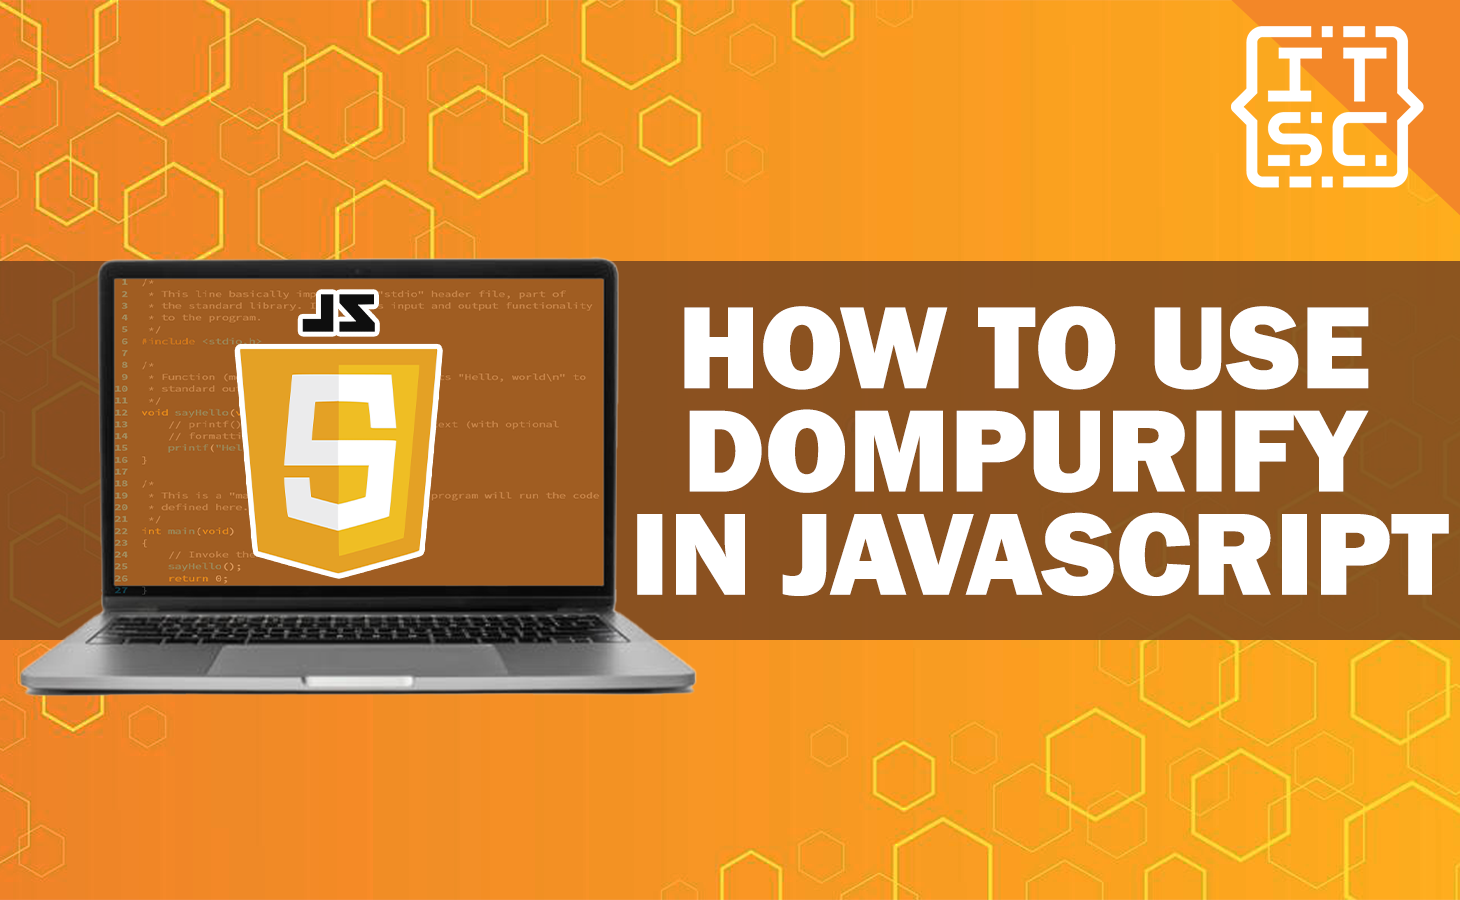 How to Use Dompurify in JavaScript